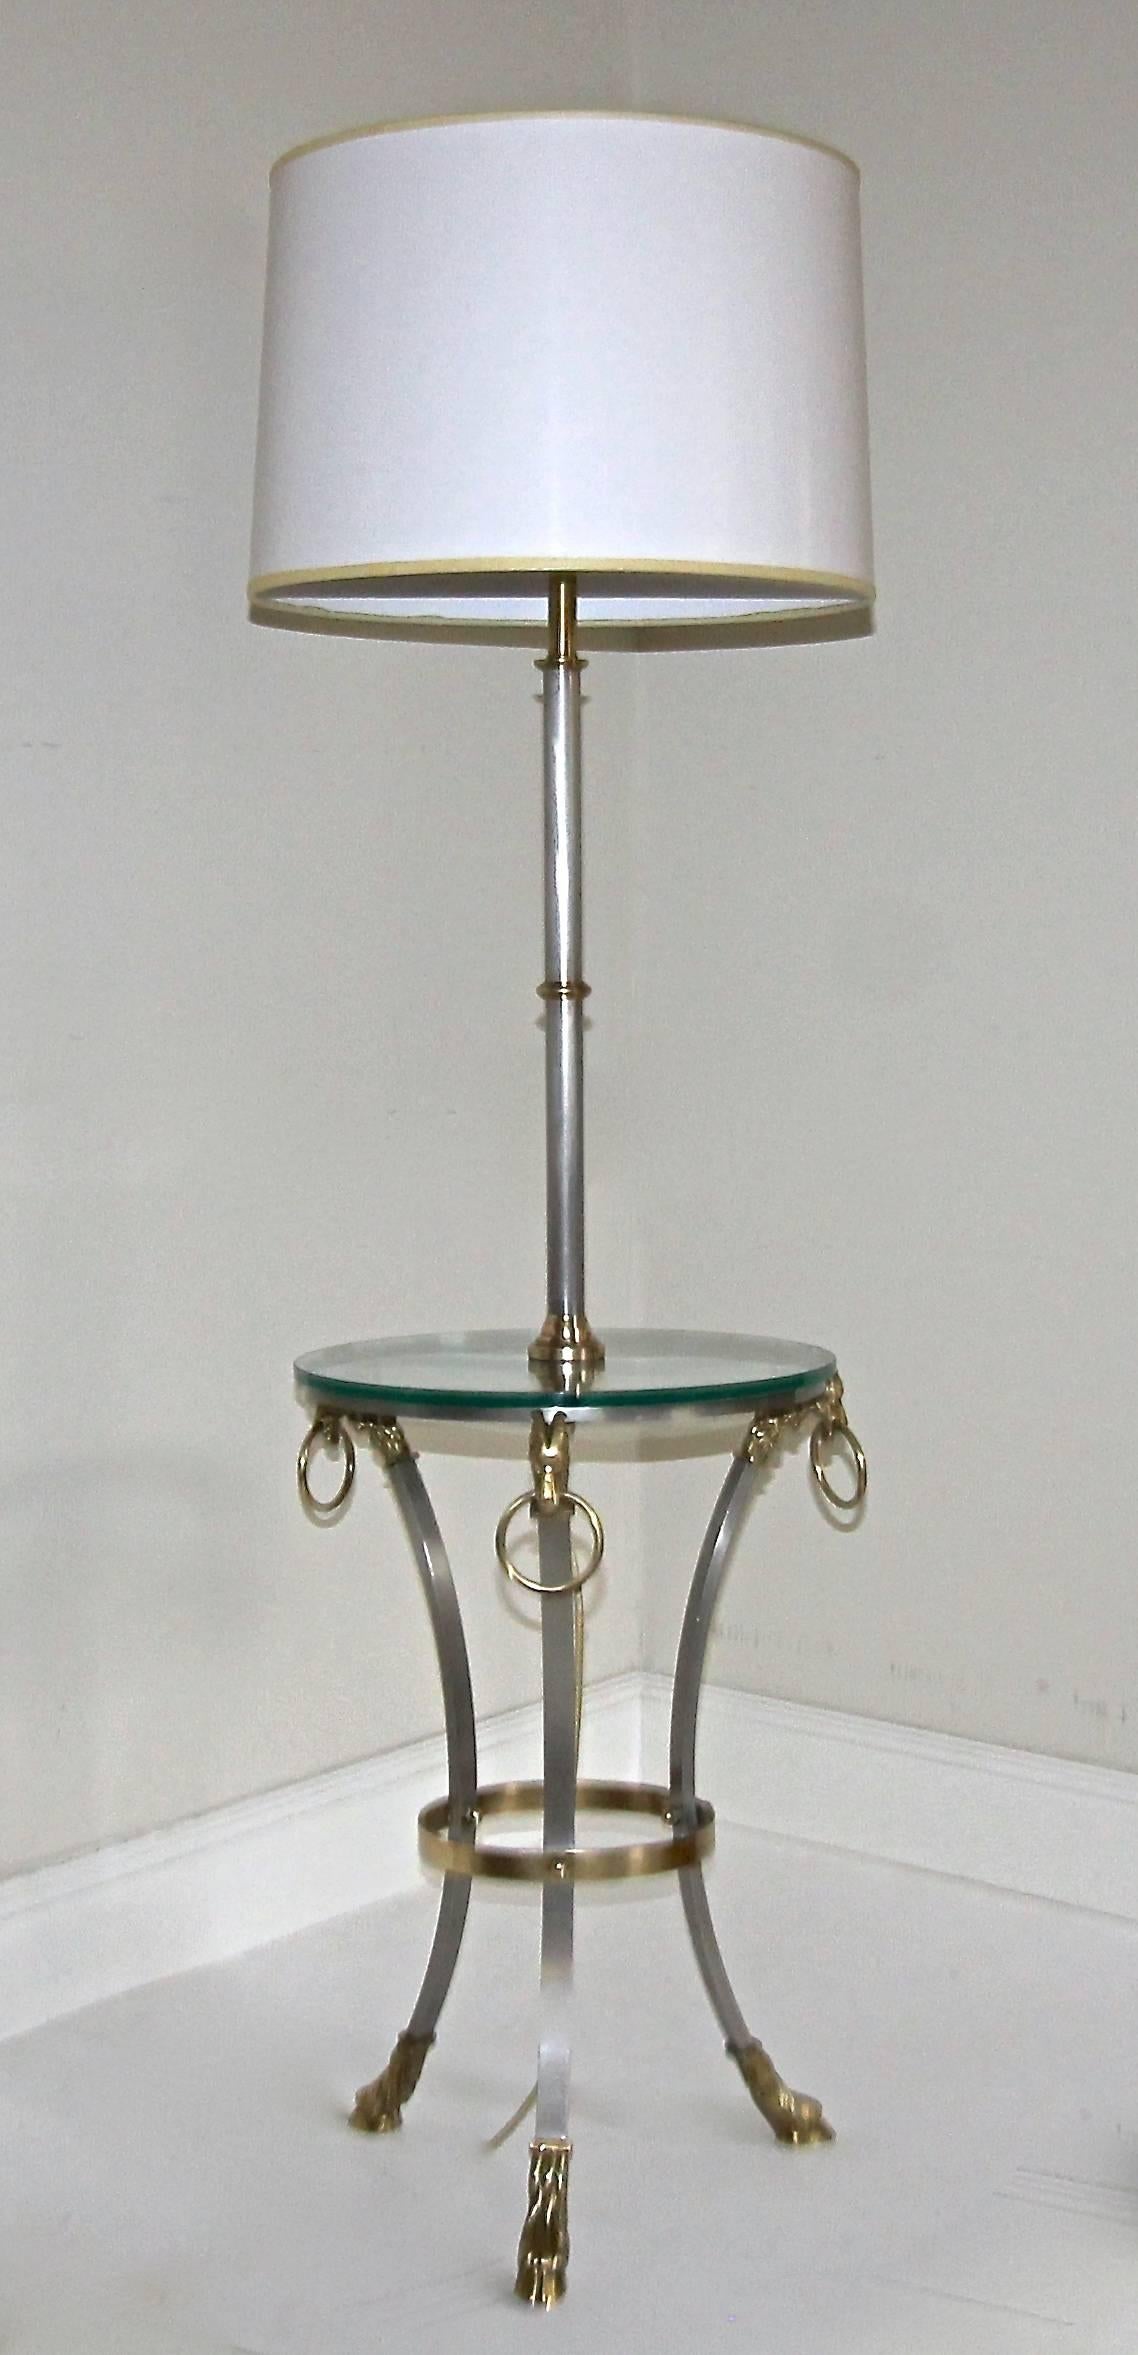 Beautiful Maison Jansen style brass and steel lamp side table with glass top and ram's head and hoof feet motif brass detailing. Newly wired. Shade not included and shown for photography purposes only.